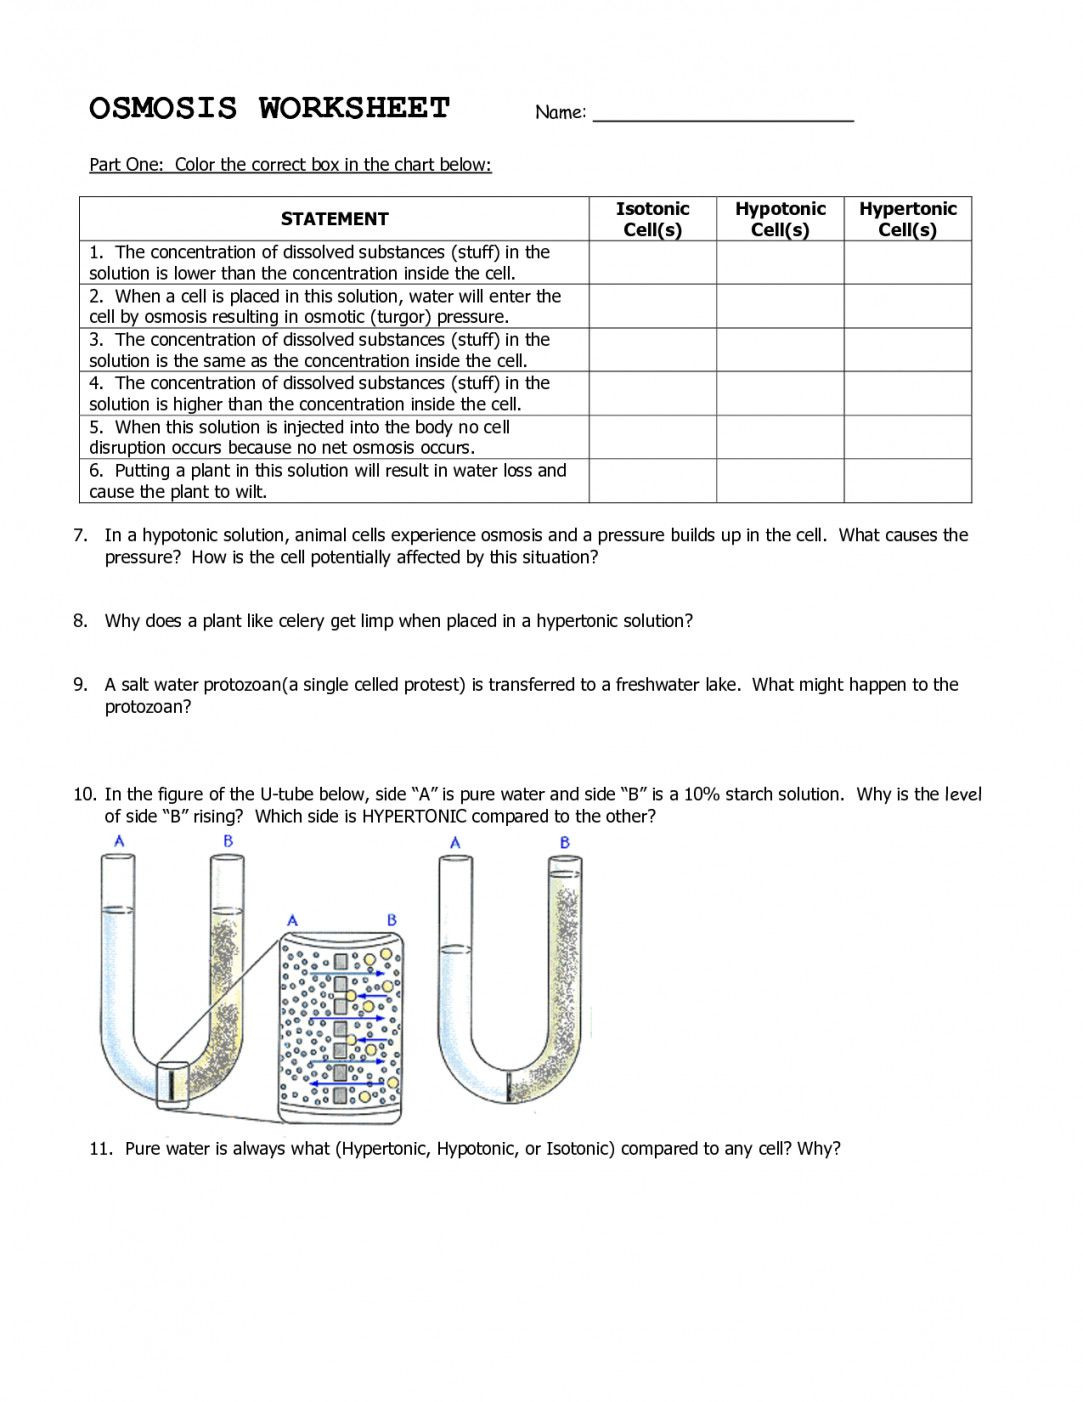 Science 8 Diffusion And Osmosis Worksheet Answers db excel com